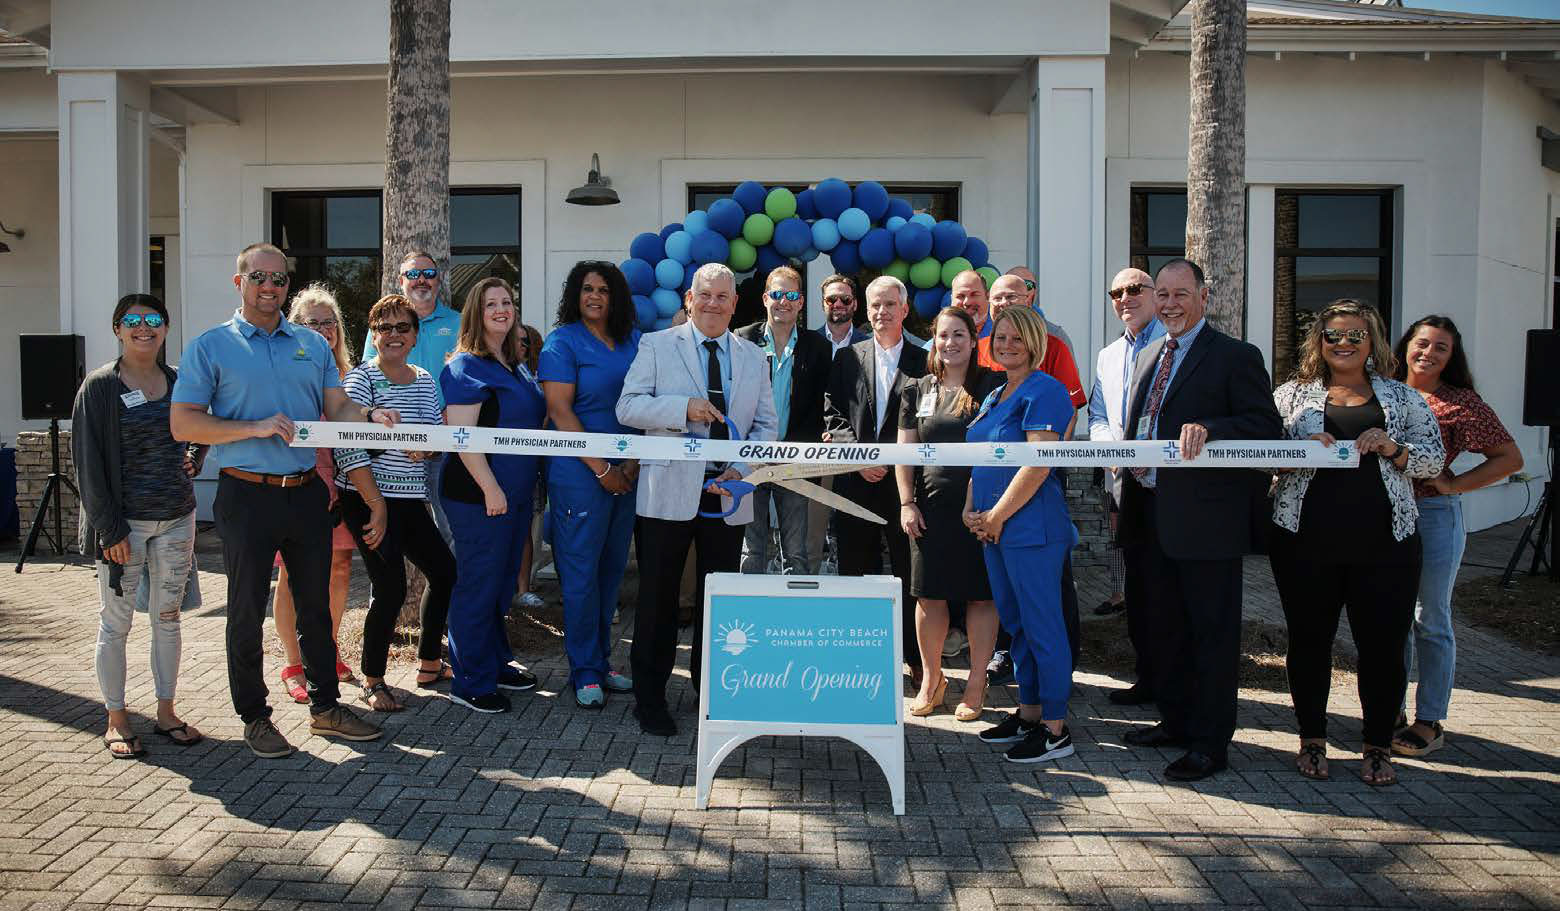 TMH Physician Partners - Primary Care in Panama City Beach opens